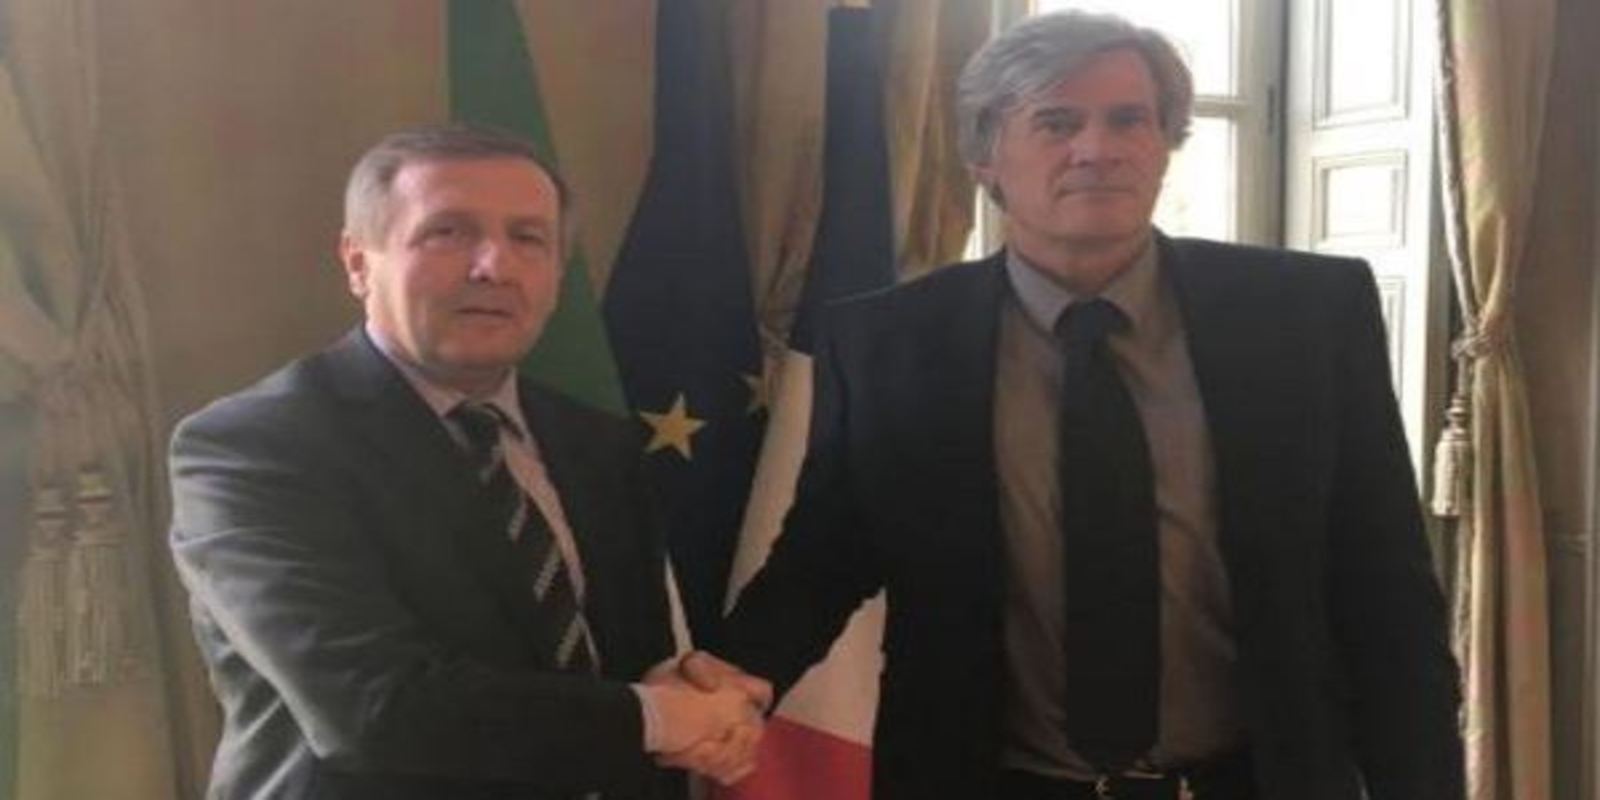 The Minister for Agriculture, Food and the Marine, Michael Creed TD, today met his French counterpart, Minister for Agriculture, Food and Forestry, Stephane Le Foll